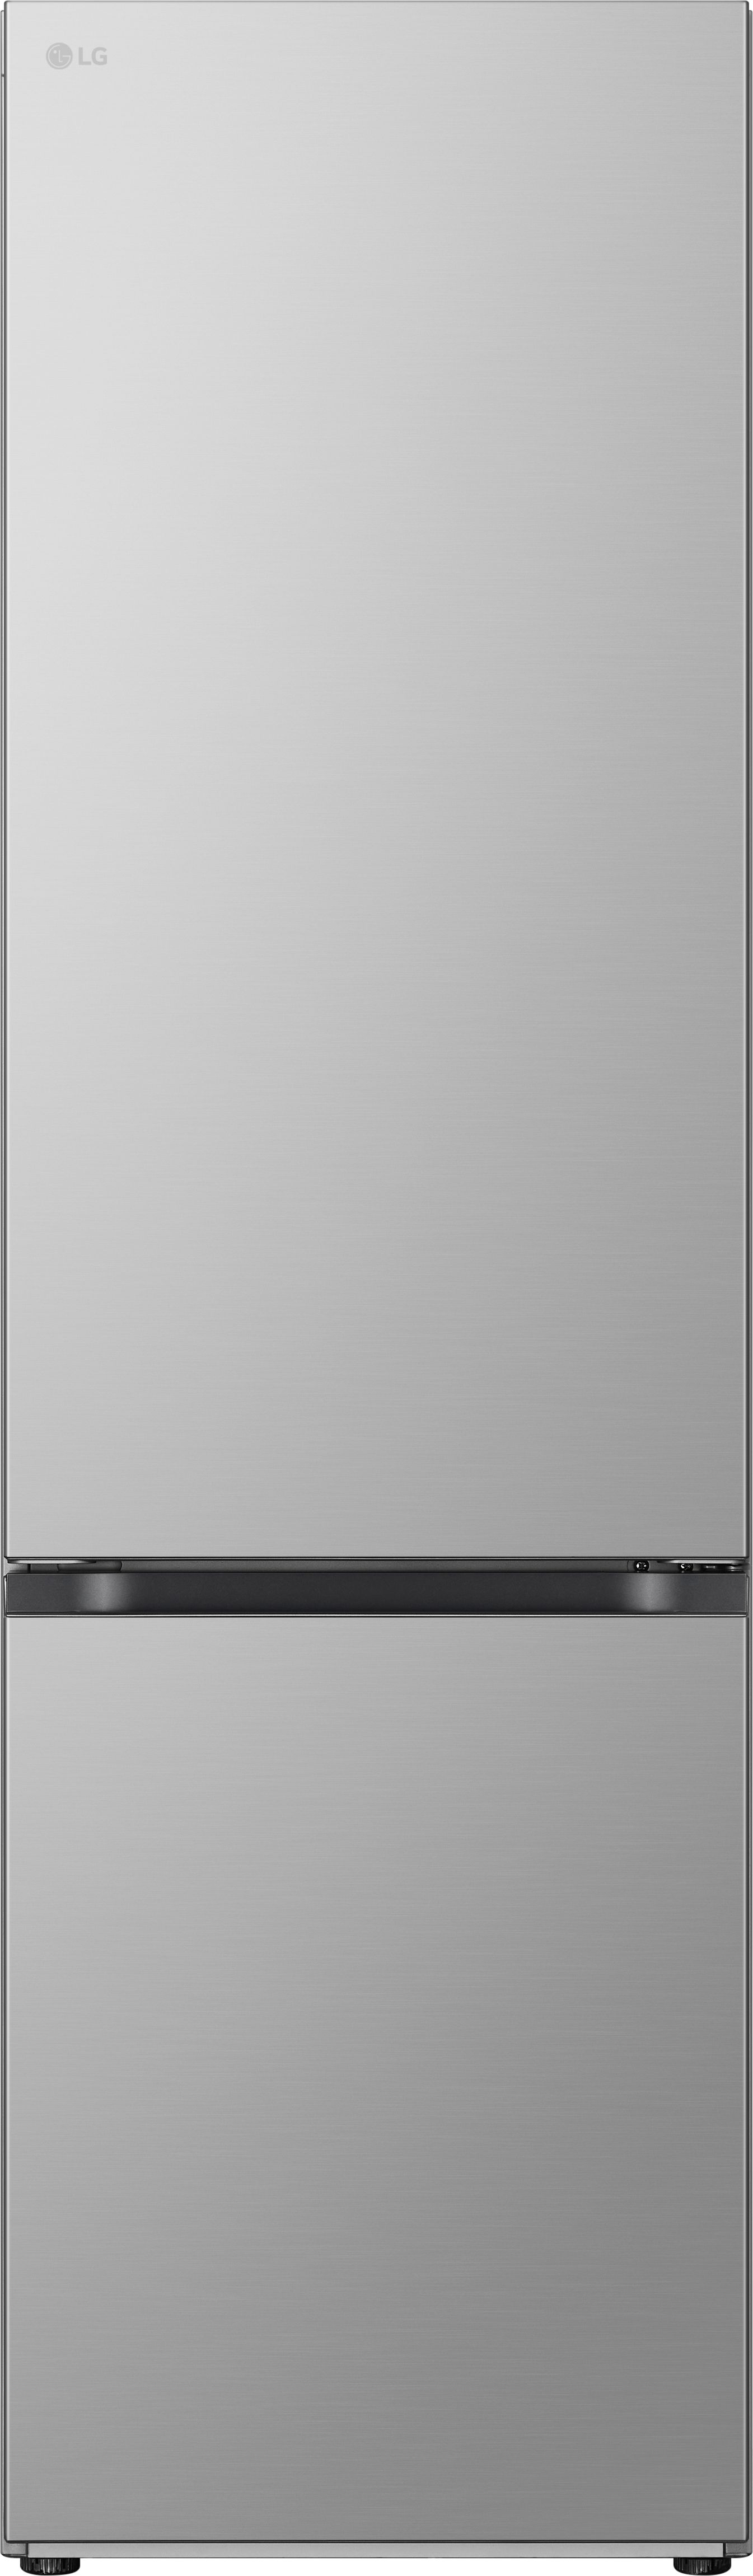 LG NatureFRESH GBV3200DPY 70/30 Frost Free Fridge Freezer - Prime Silver - D Rated, Silver